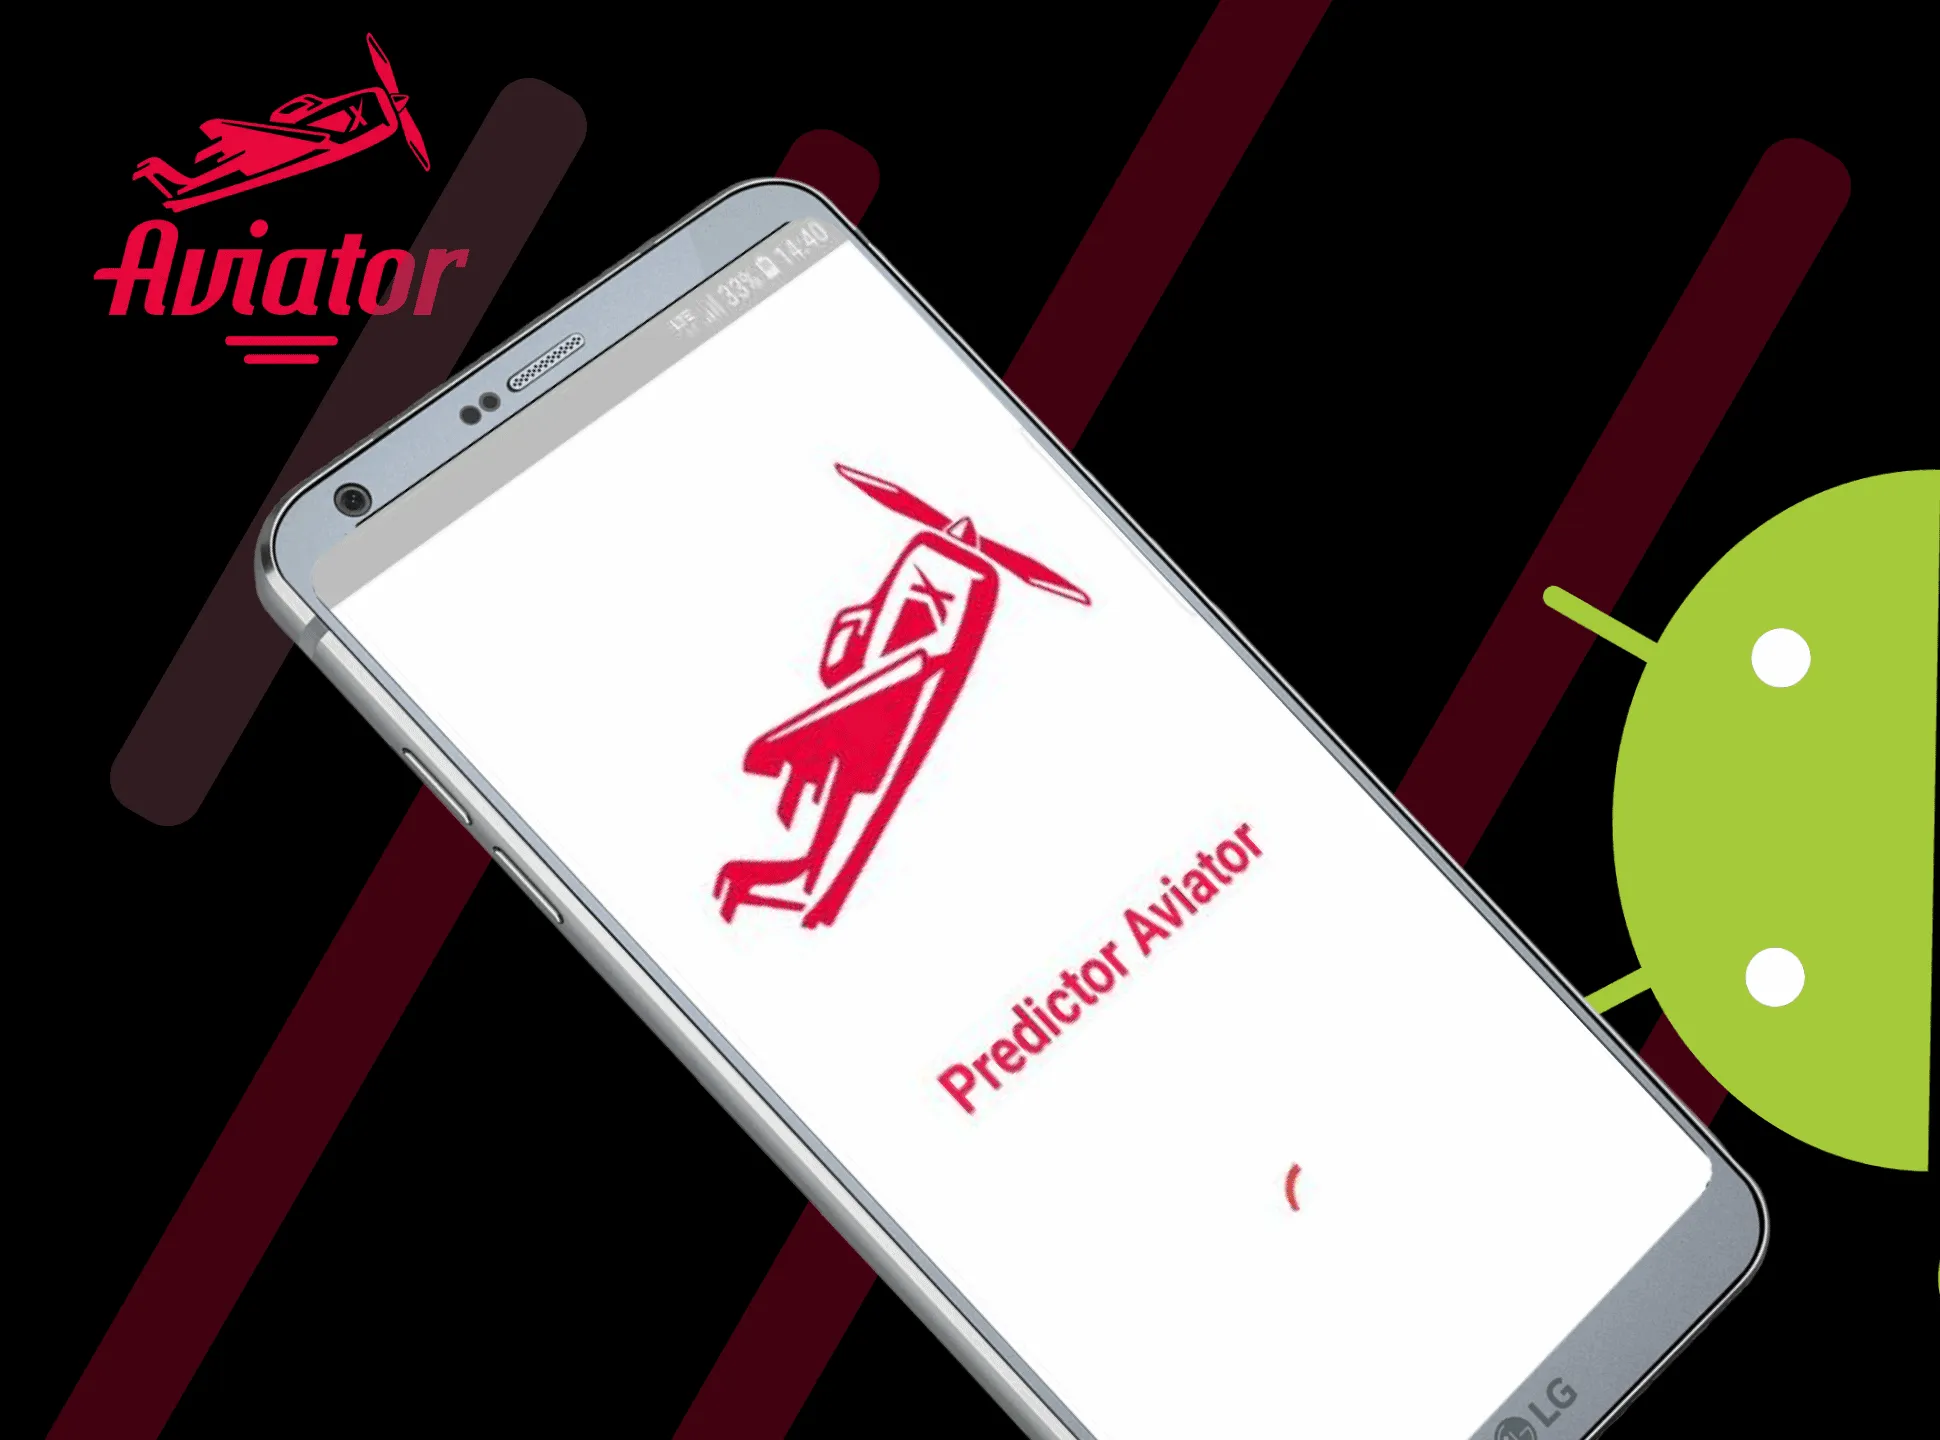 You can easily play Aviator game via your Android device.